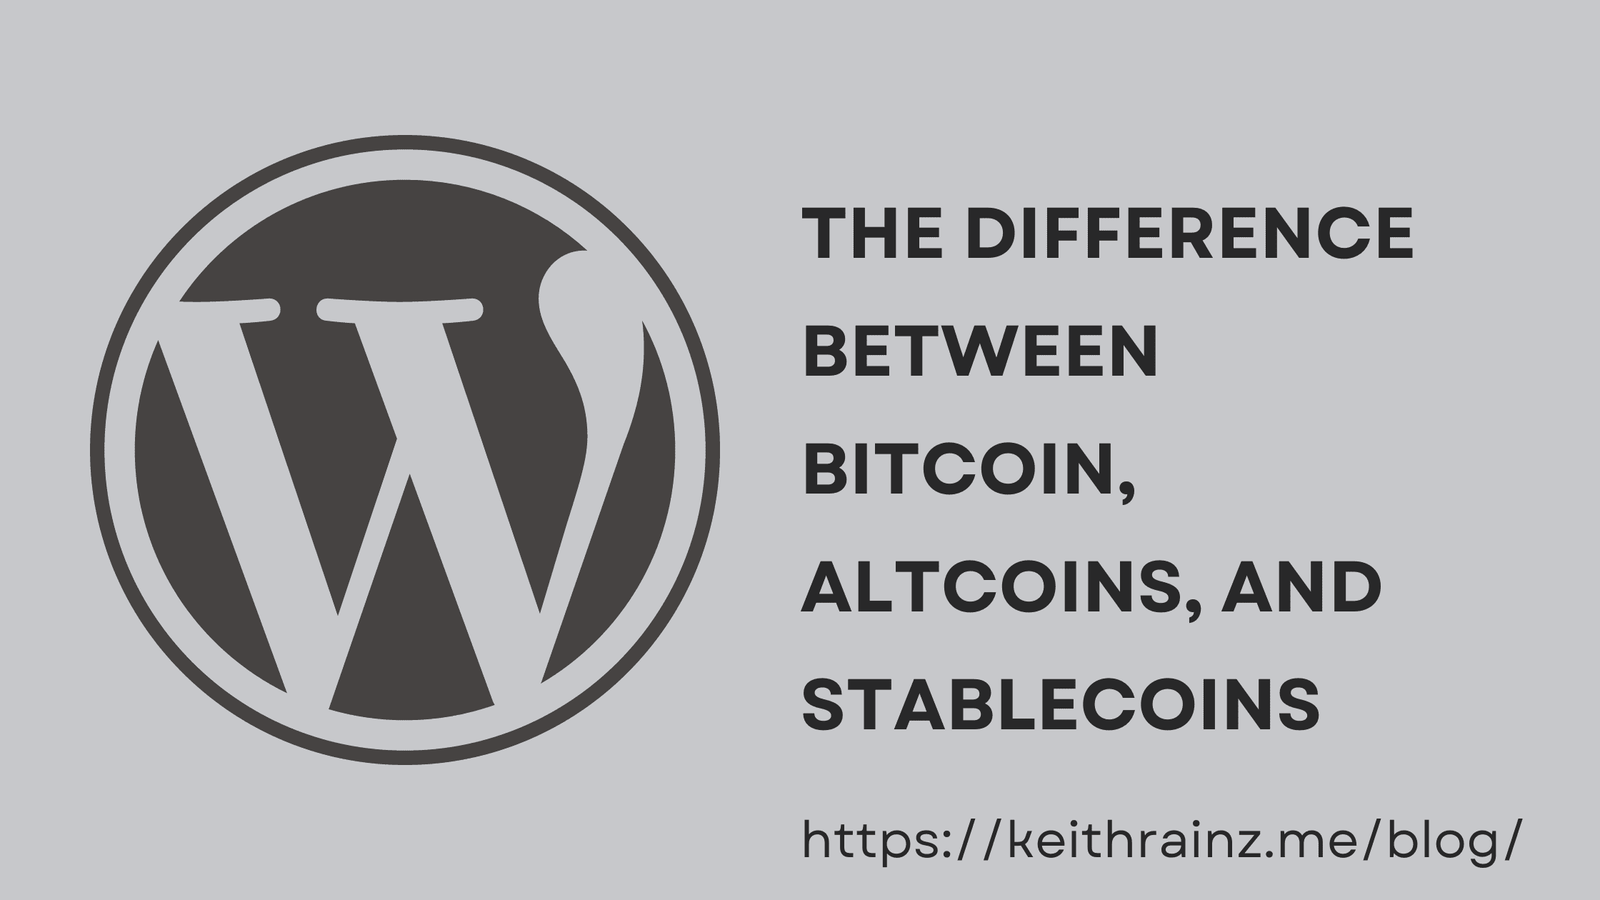 The difference between Bitcoin, altcoins, and stablecoins